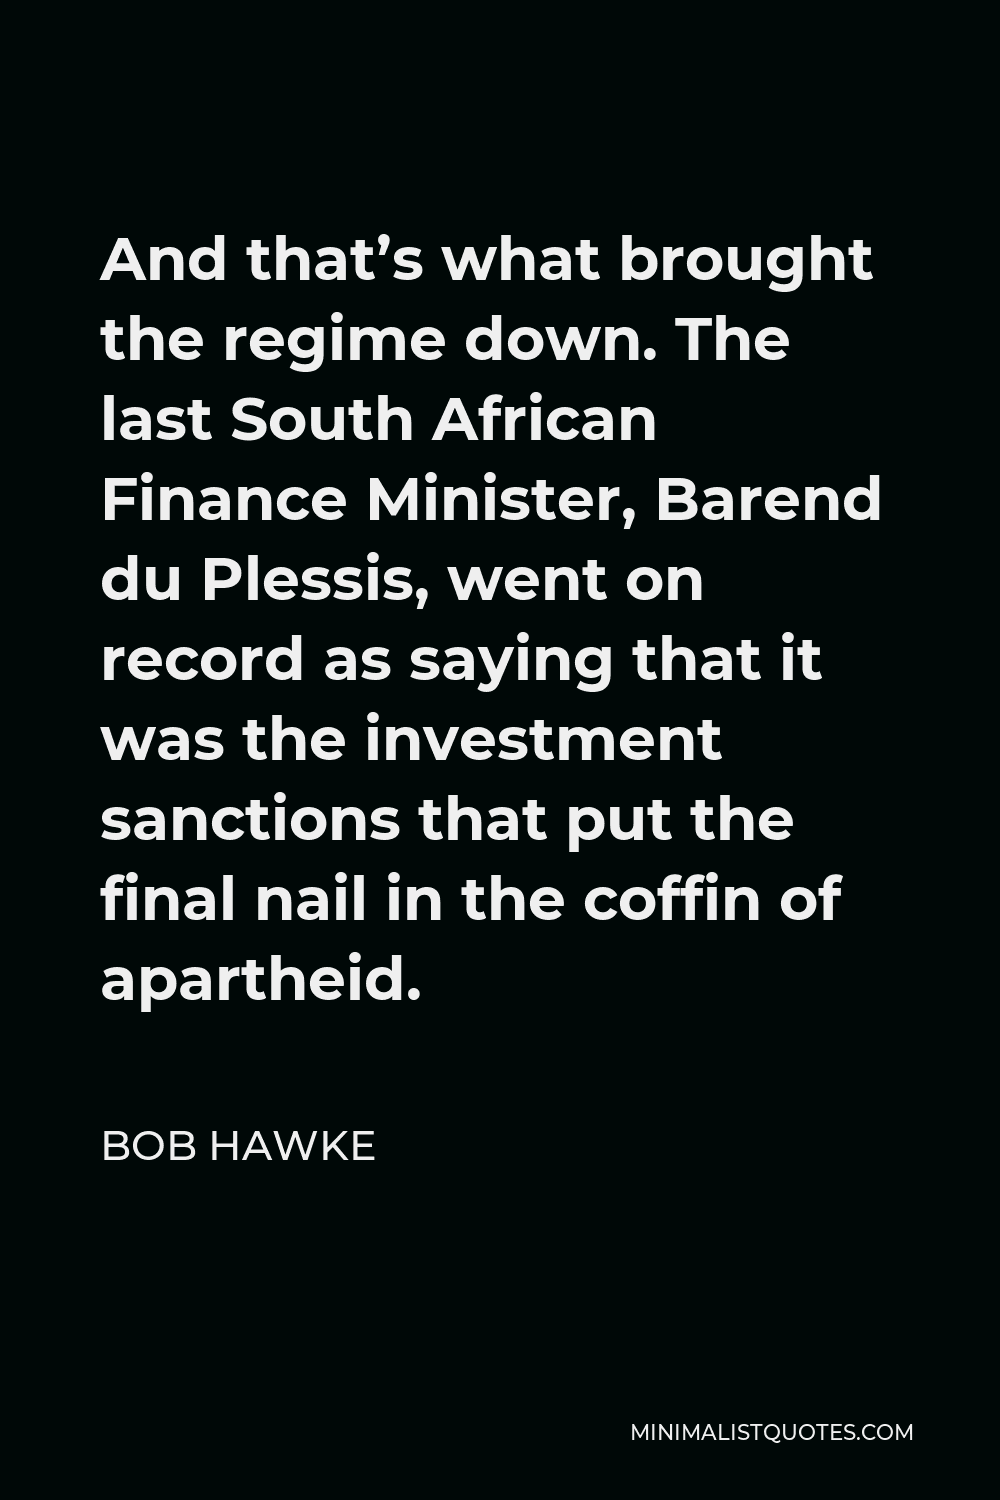 Bob Hawke Quote - And that’s what brought the regime down. The last South African Finance Minister, Barend du Plessis, went on record as saying that it was the investment sanctions that put the final nail in the coffin of apartheid.